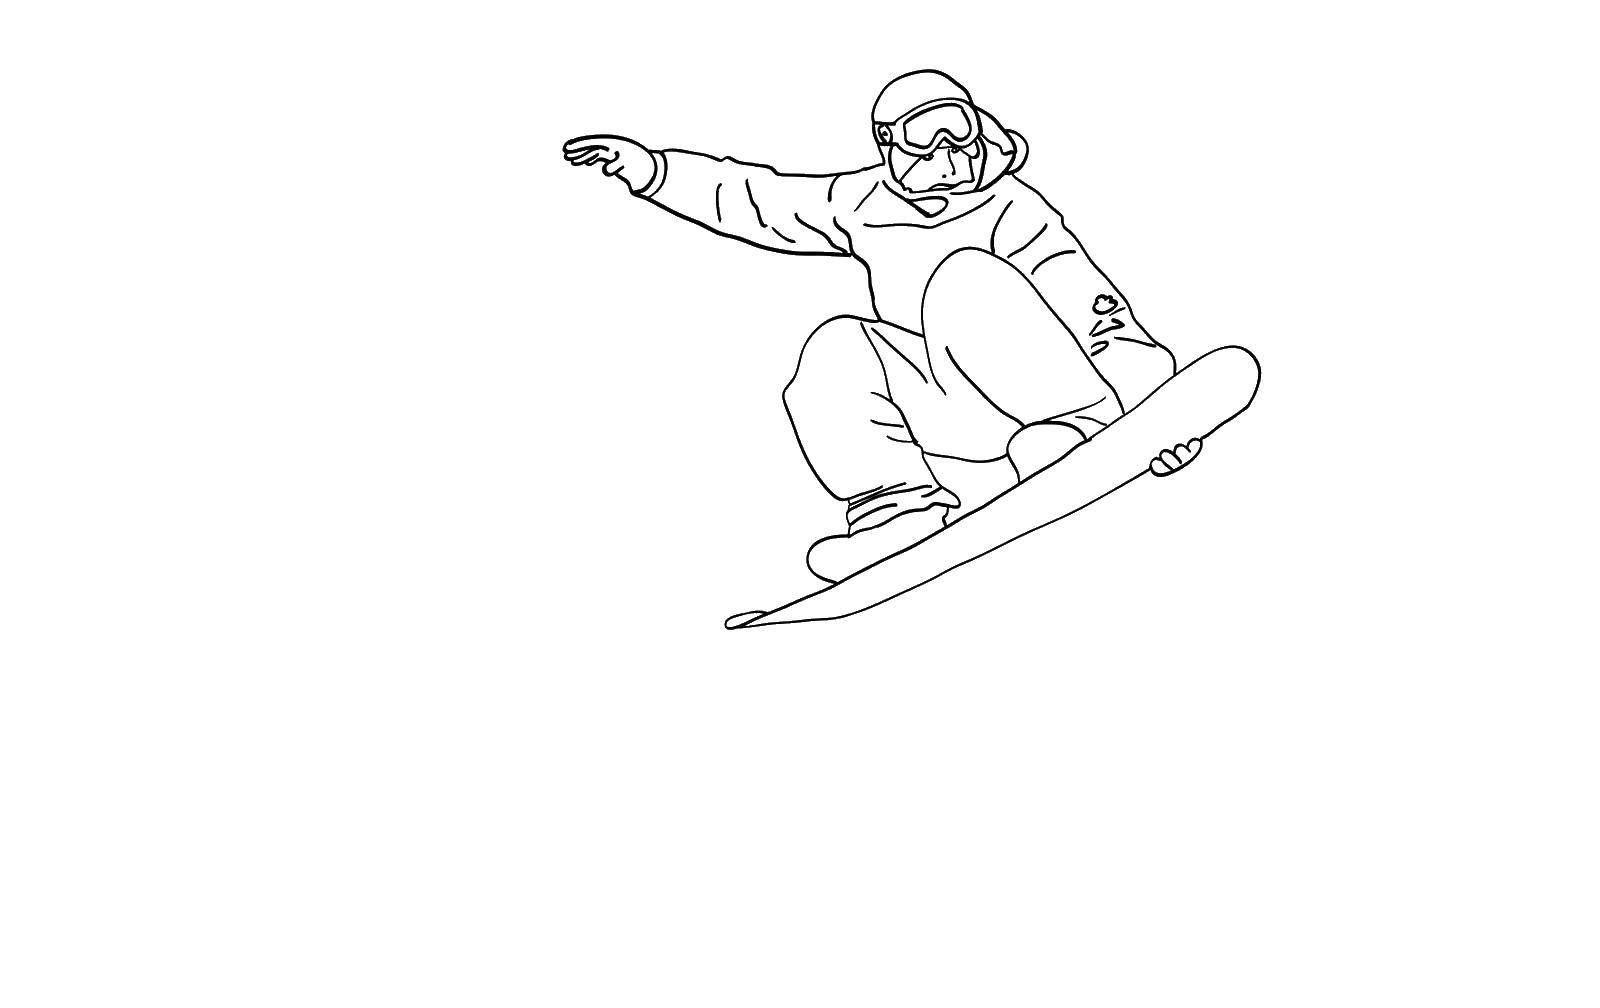 Coloring Snowboarder. Category sports. Tags:  snowboard.